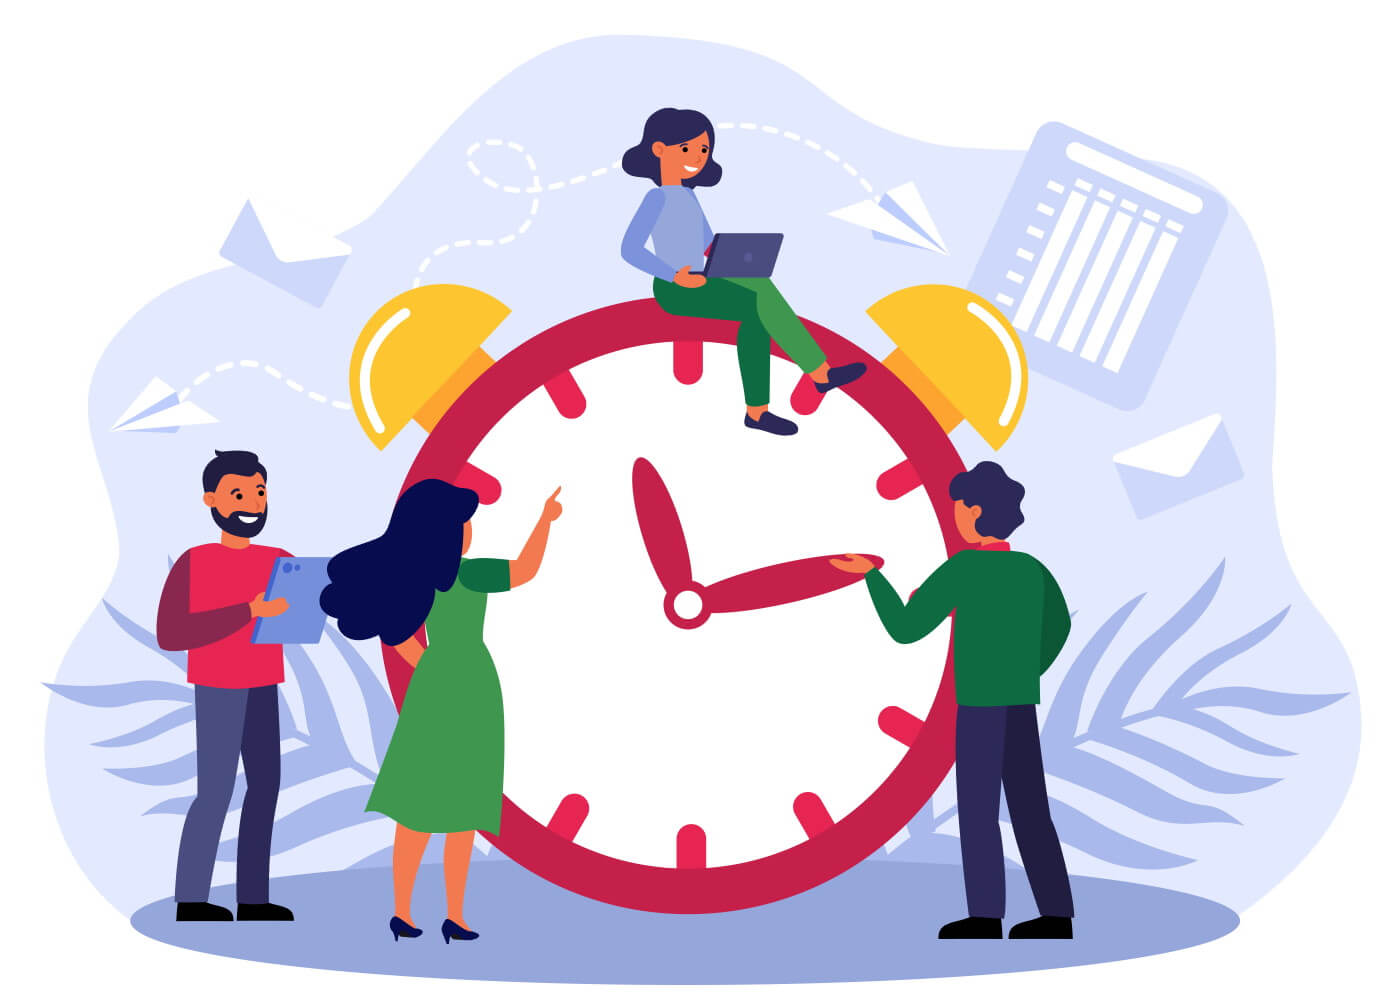 Employee Time Tracking